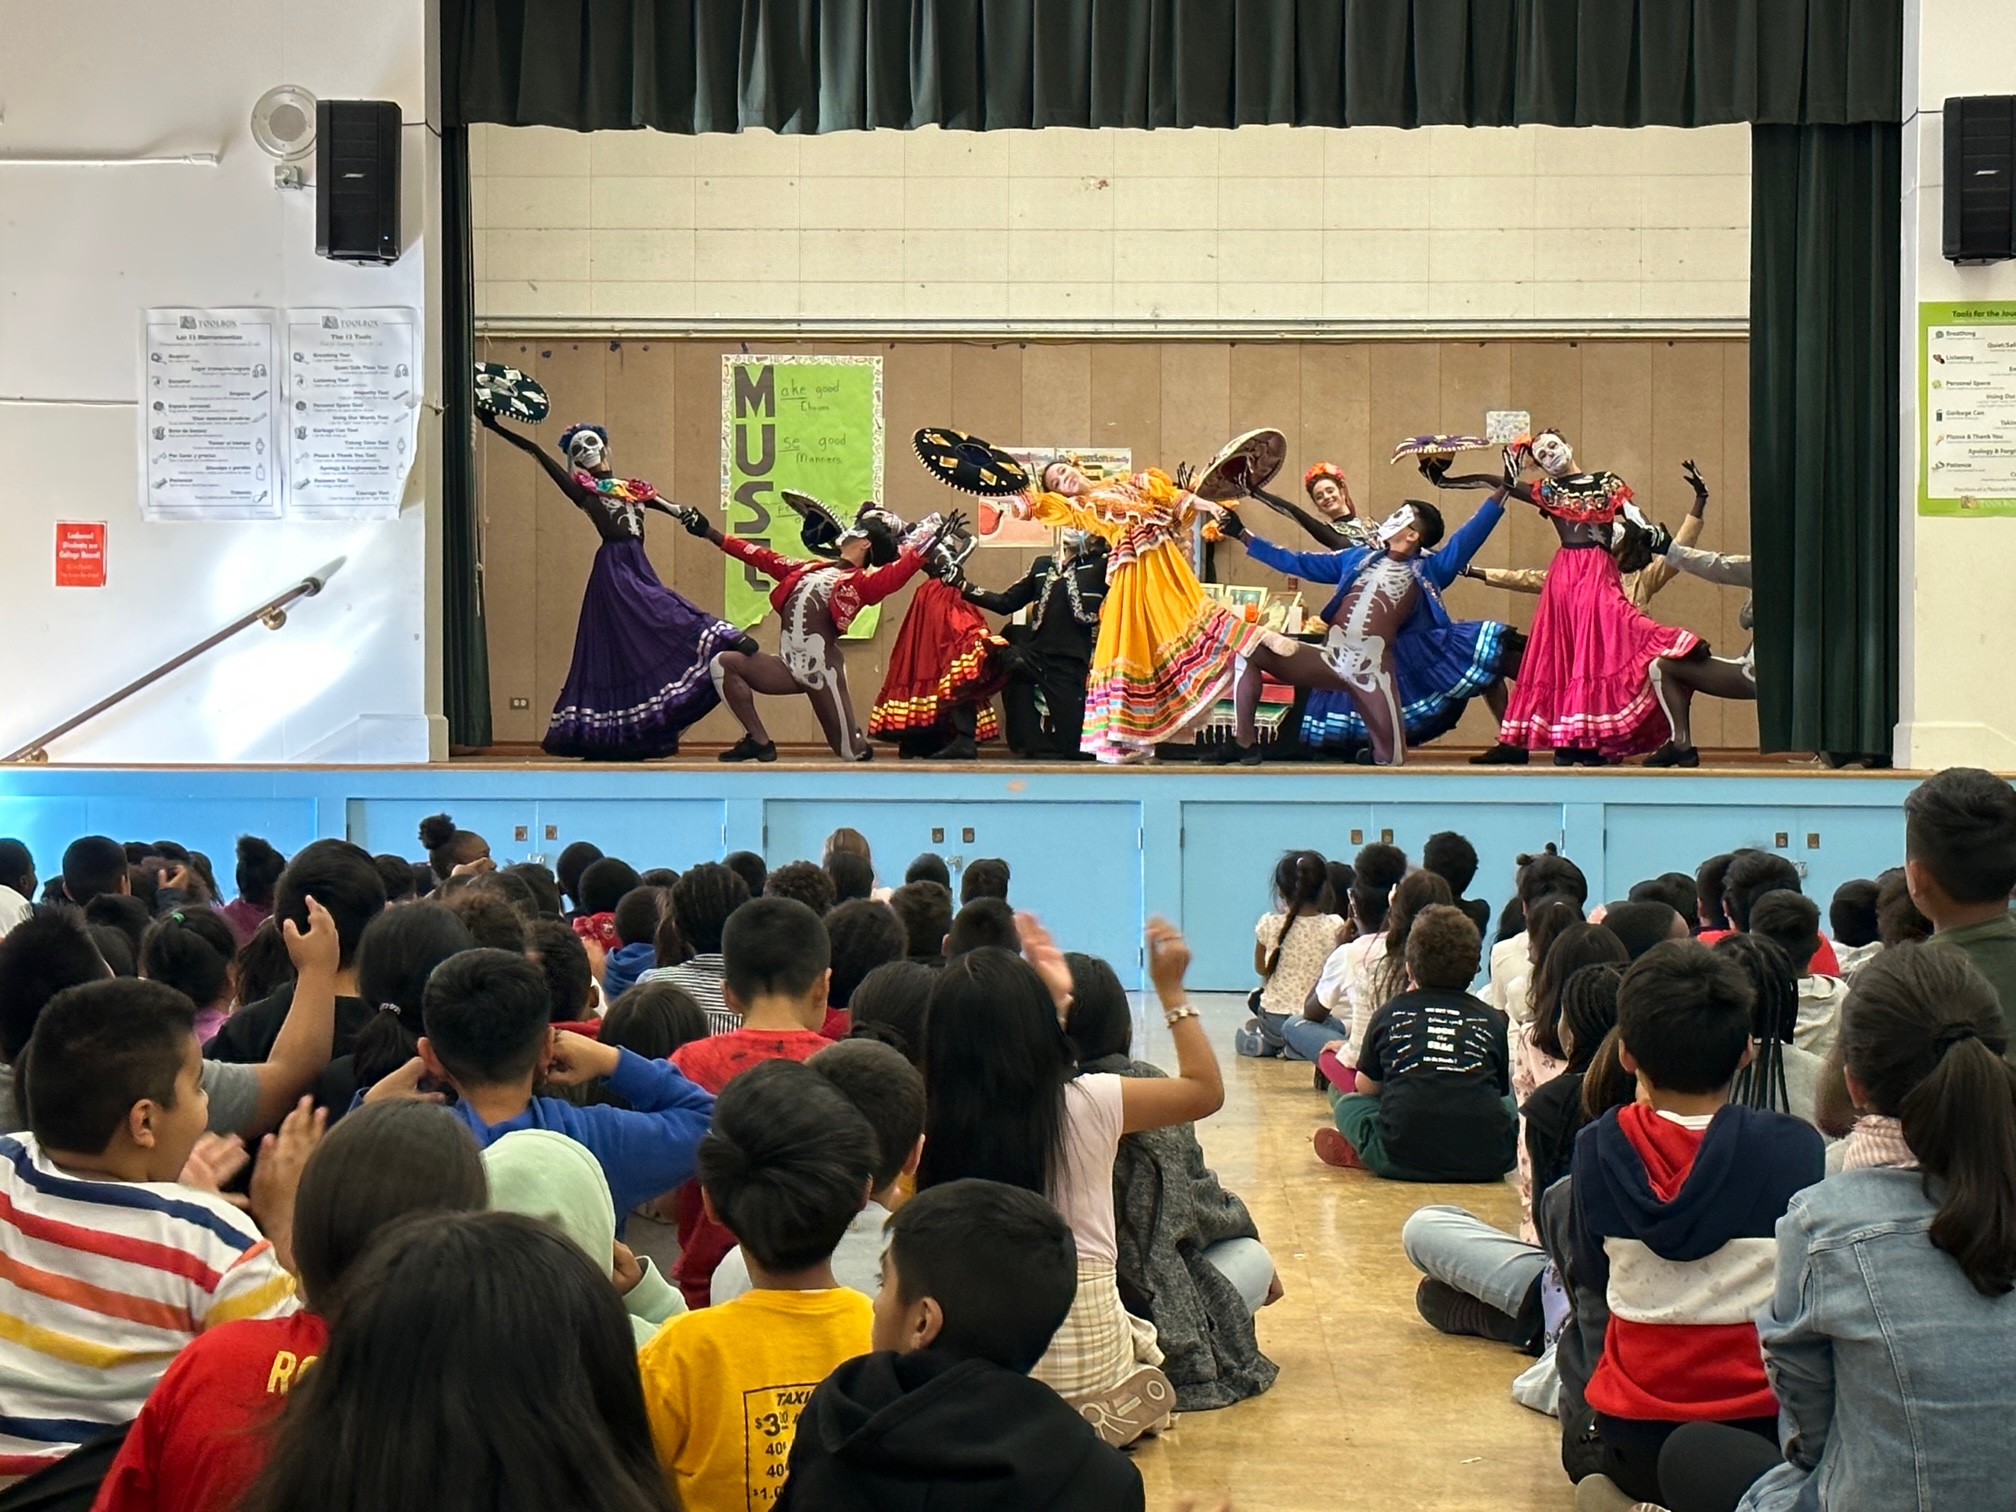 OBC dancers performing for students on a school stage.